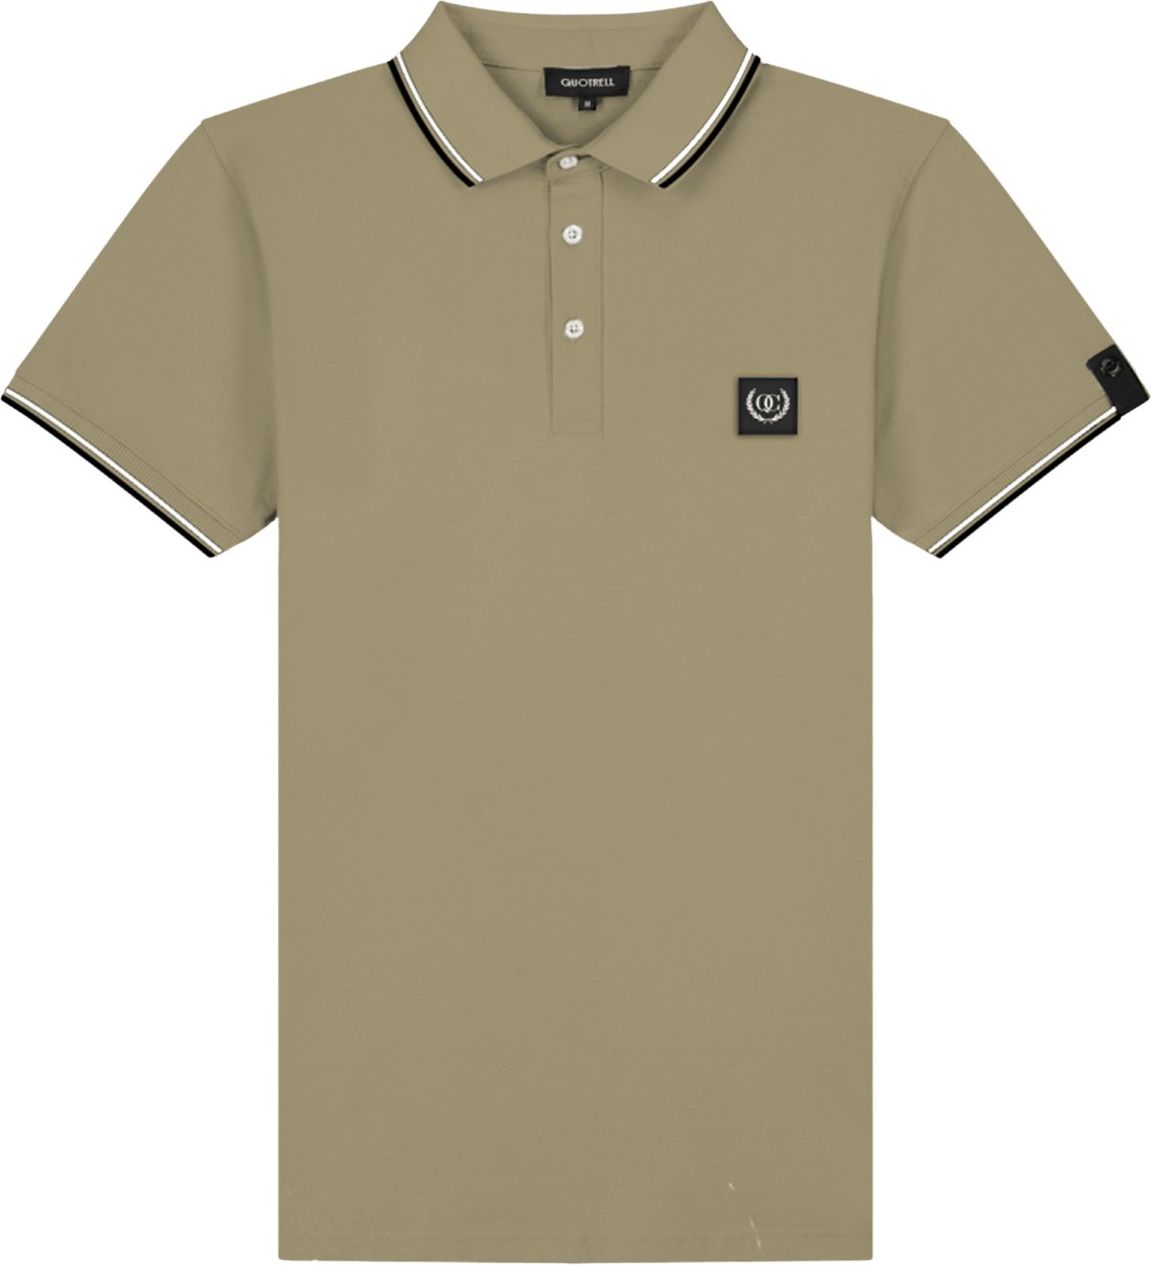 Quotrell Quotrell Couture - Avergne Polo | Faded Khaki/black Groen